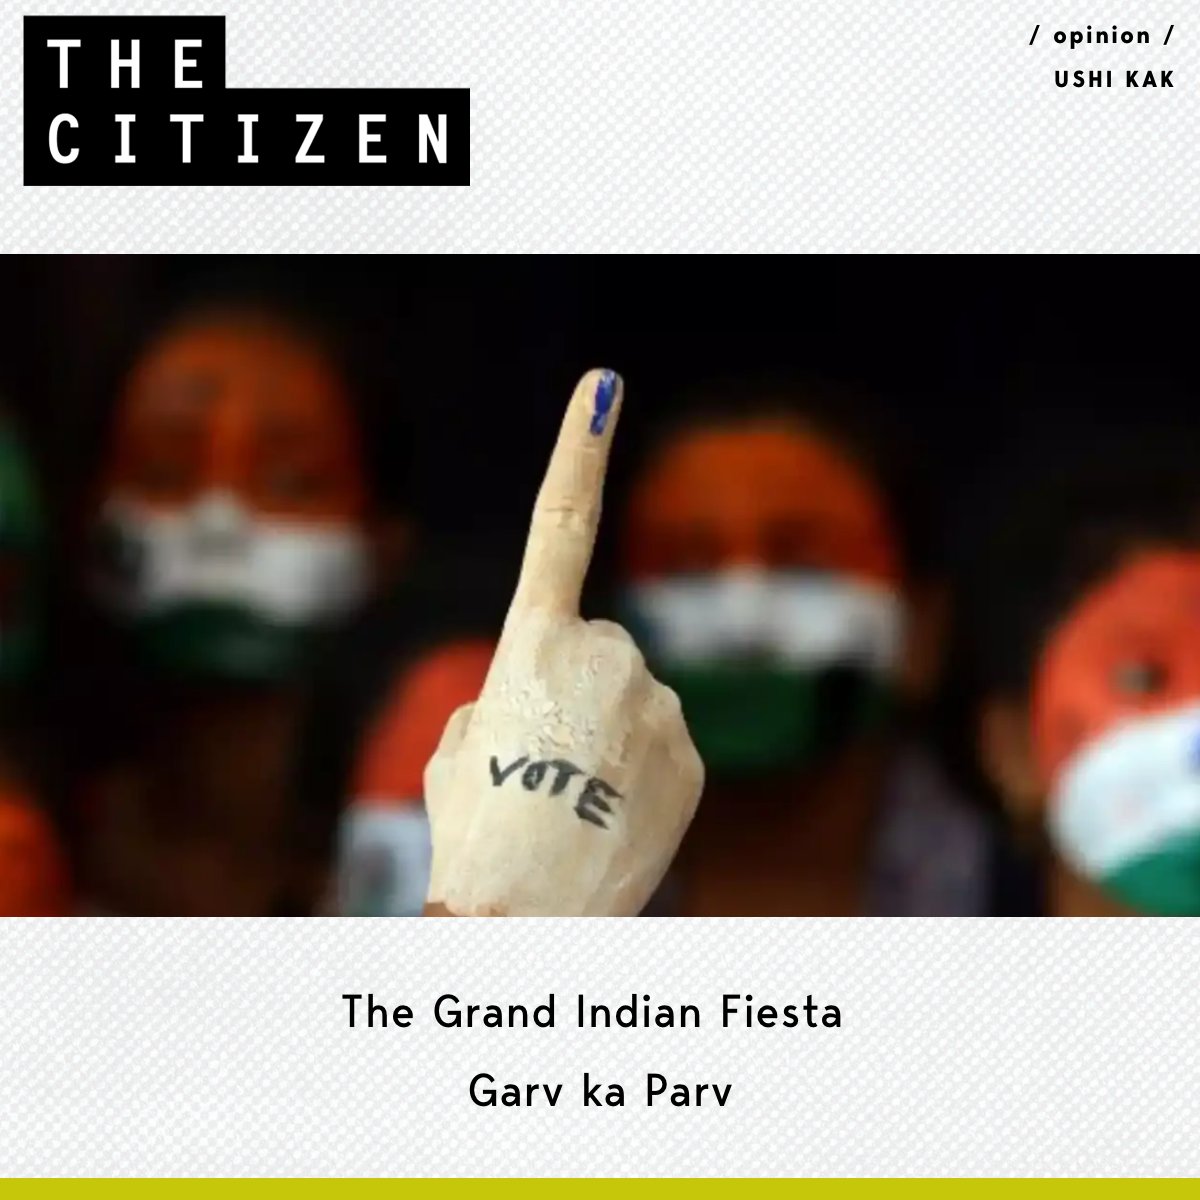 After being held up as a template of a vibrant democracy for years, despite the illiteracy of a large segment of its population, the mantle of Indian democracy looks a little tattered. USHI KAK writes: Read the full report here: shorturl.at/biyLY #elections2024